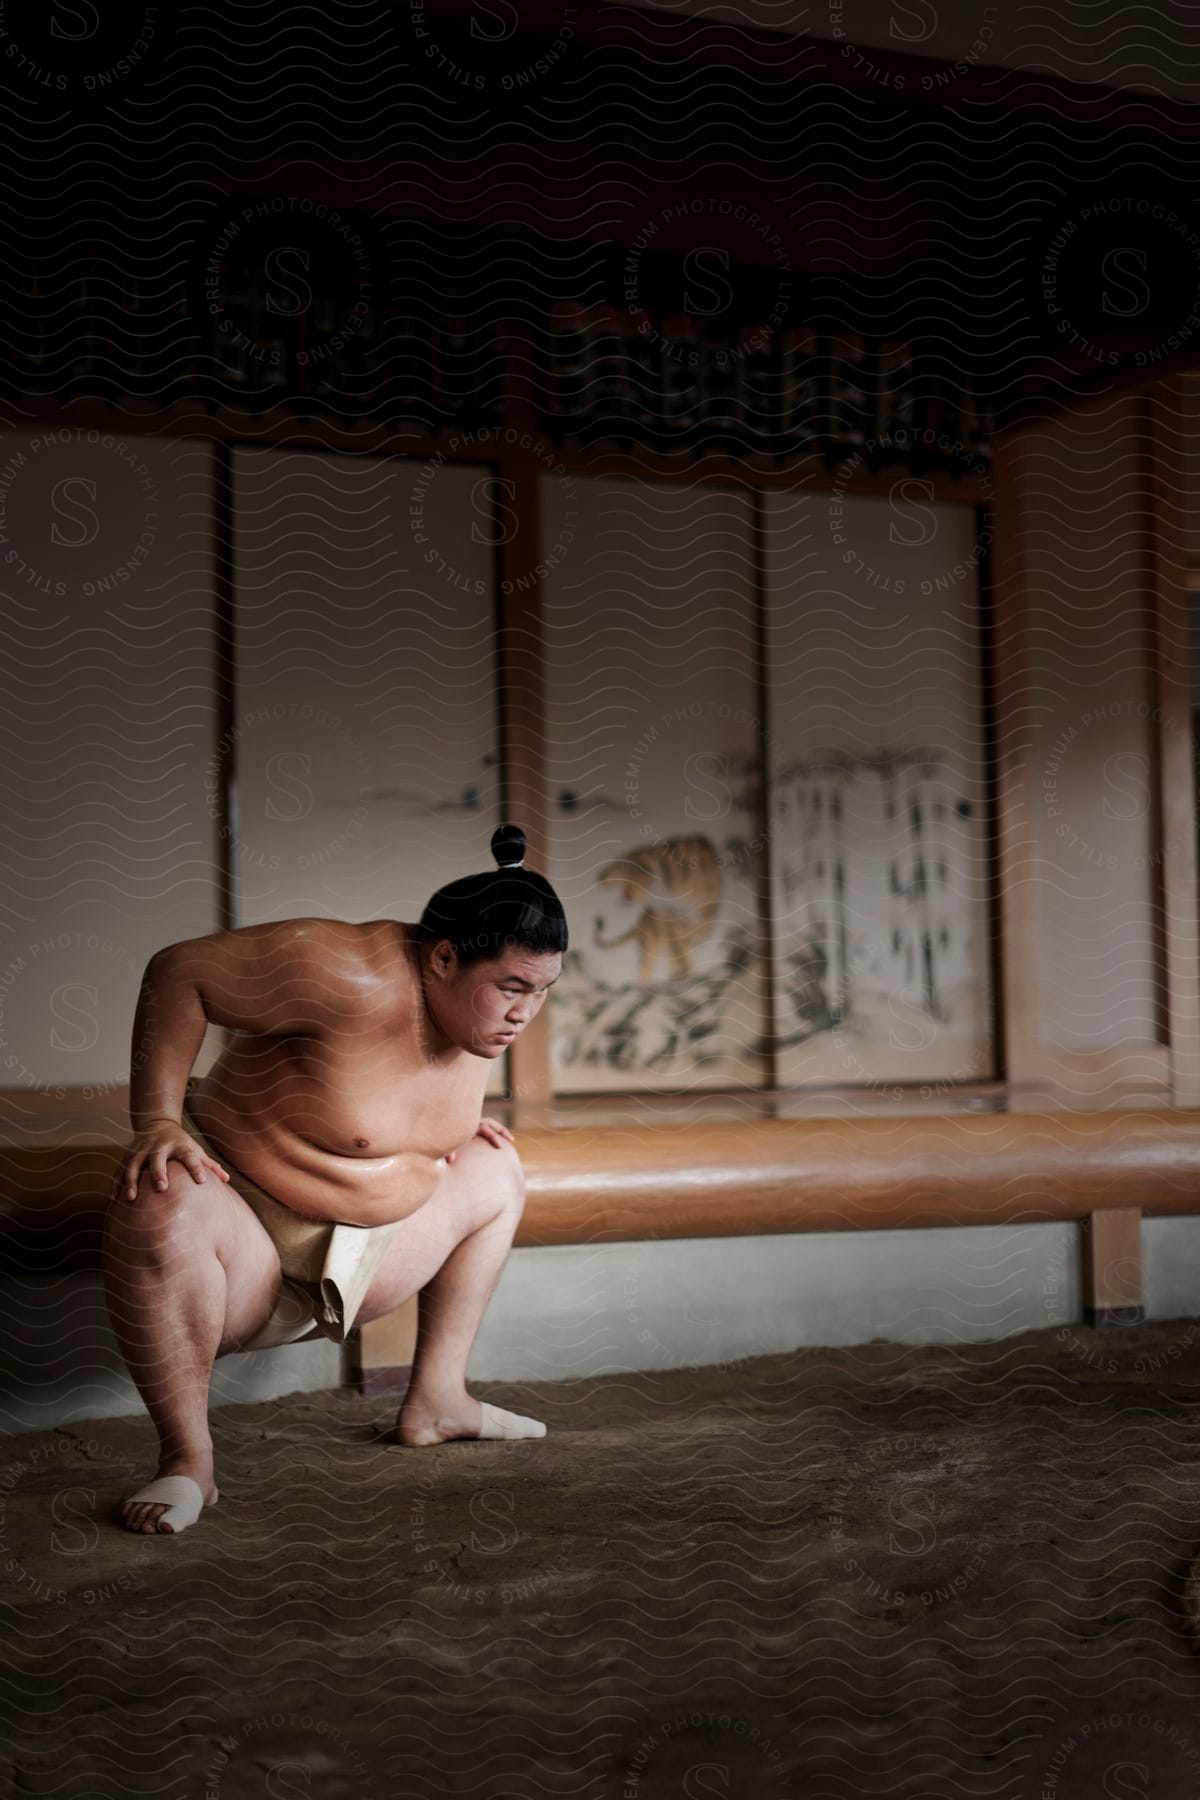 A sumo wrestler crouches down on a dirt floor